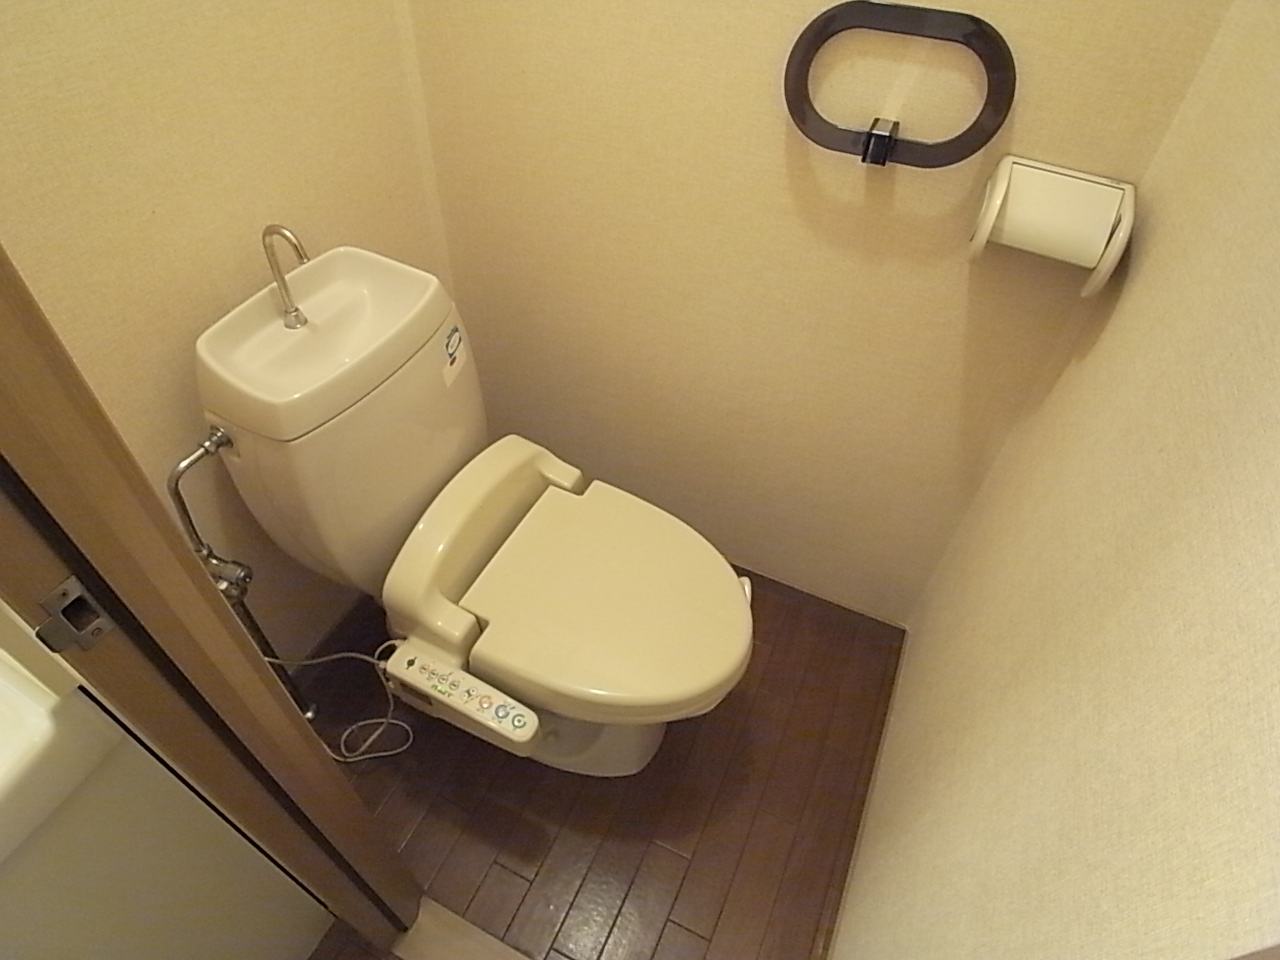 Toilet. With a happy warm water washing toilet seat ☆